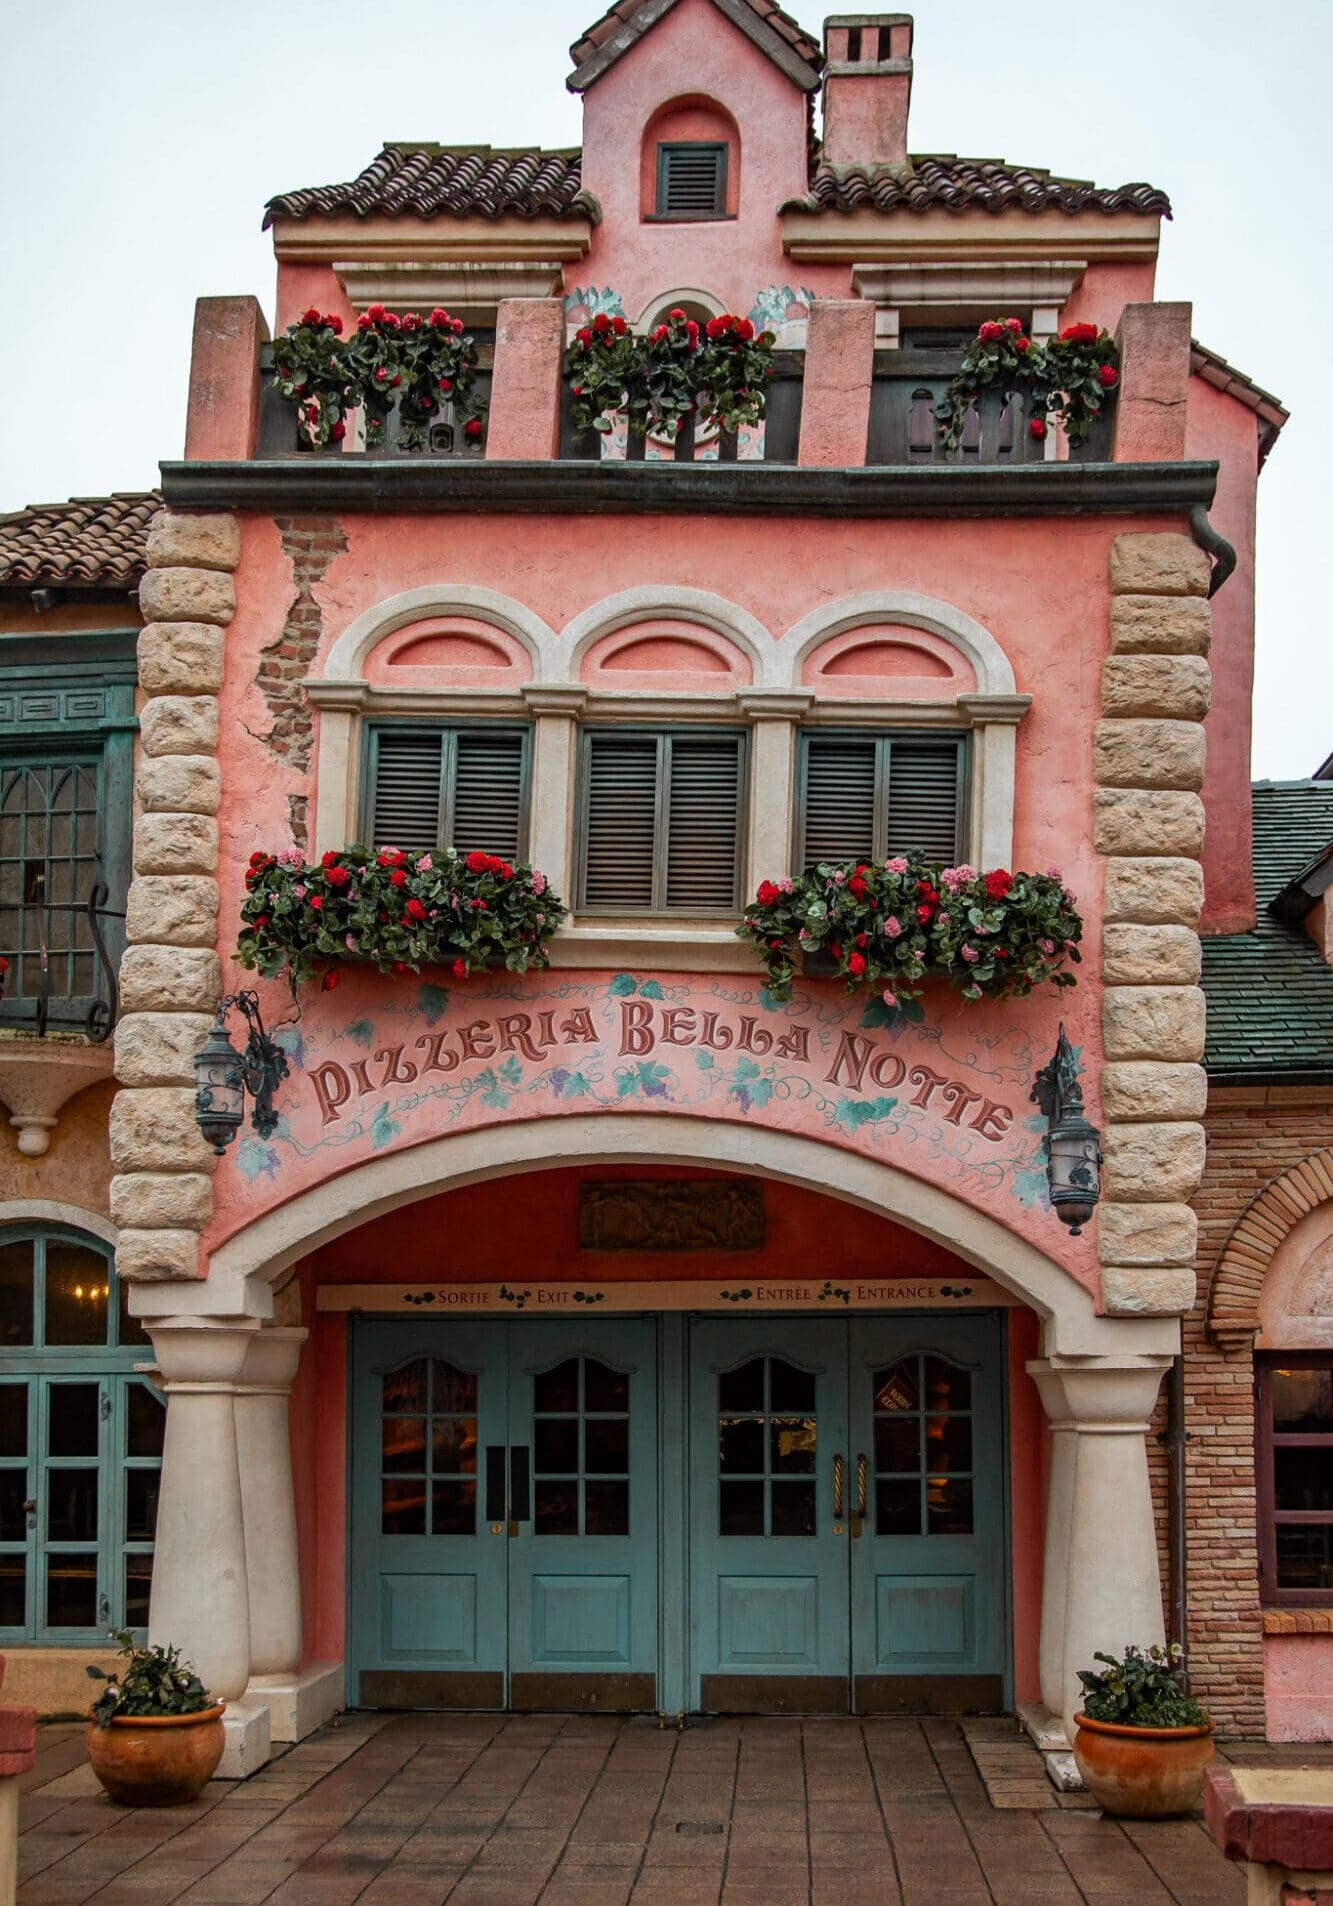 A pink, slightly off kilter restaurant facade with blue doors and flowers spilling out of the windows, of Pizzeria Bella Notte in Magic Kingdom Disneyland